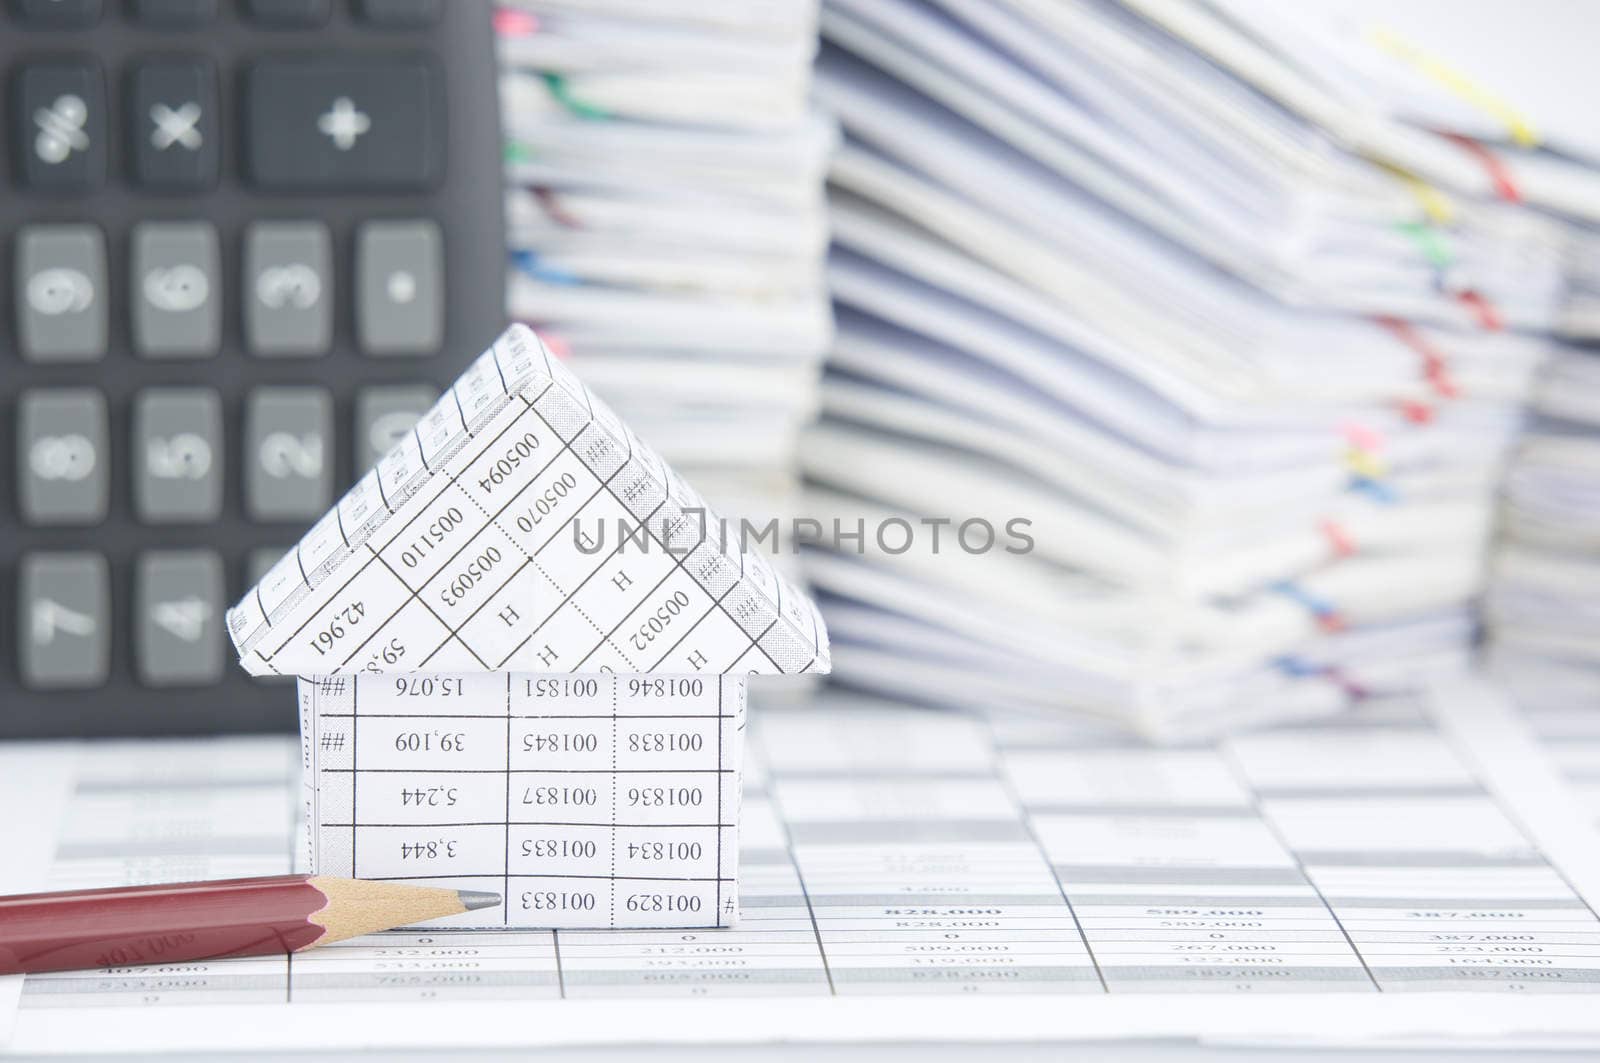 Brown pencil and house on finance account have blur calculator and pile of paperwork as background.